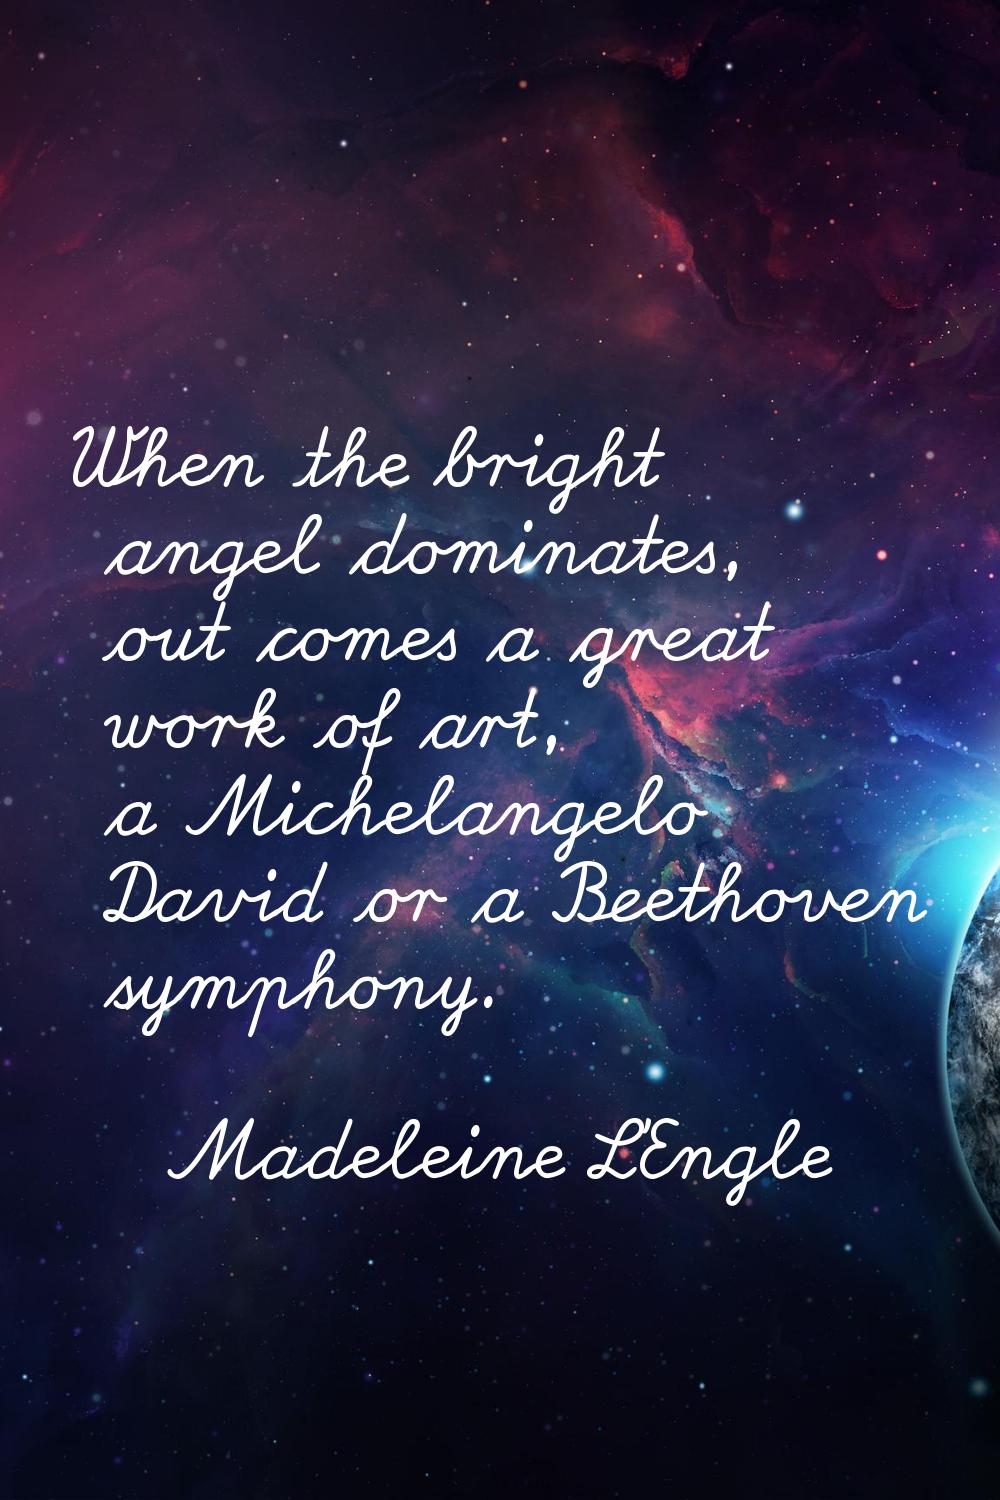 When the bright angel dominates, out comes a great work of art, a Michelangelo David or a Beethoven